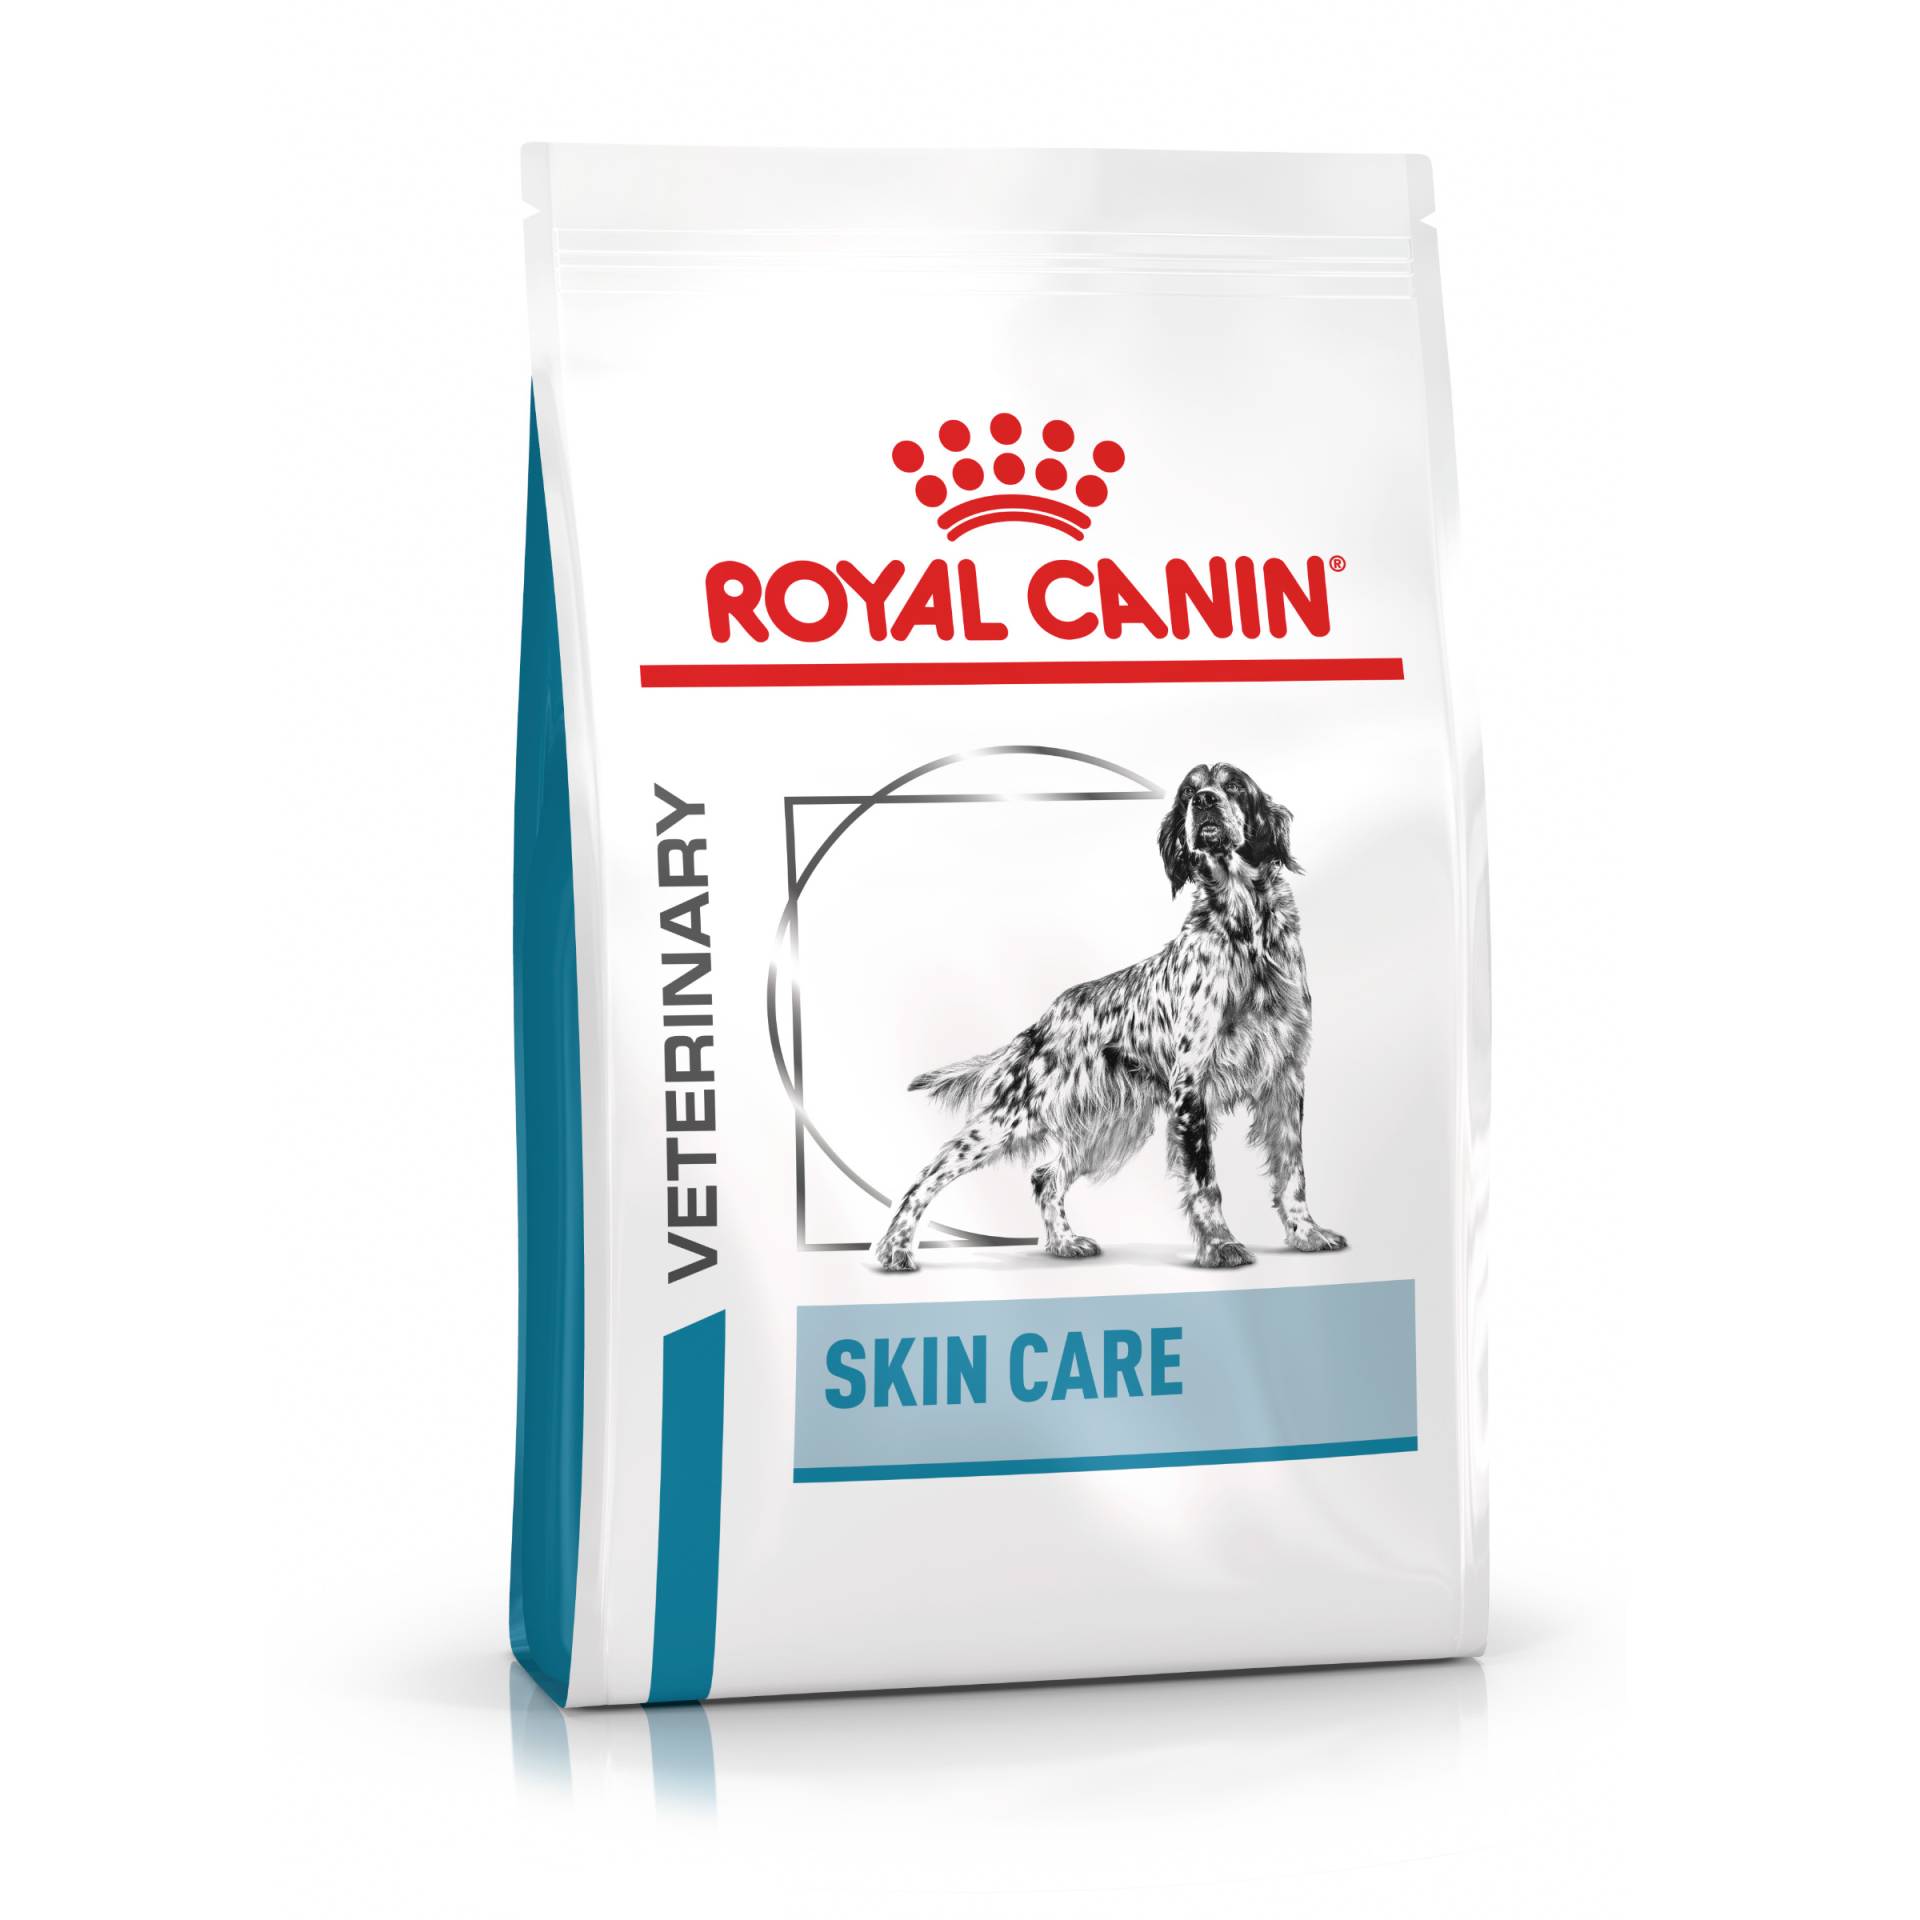 Royal Canin Veterinary Canine Skin Care - Sparpaket: 2 x 11 kg von Royal Canin Veterinary Diet